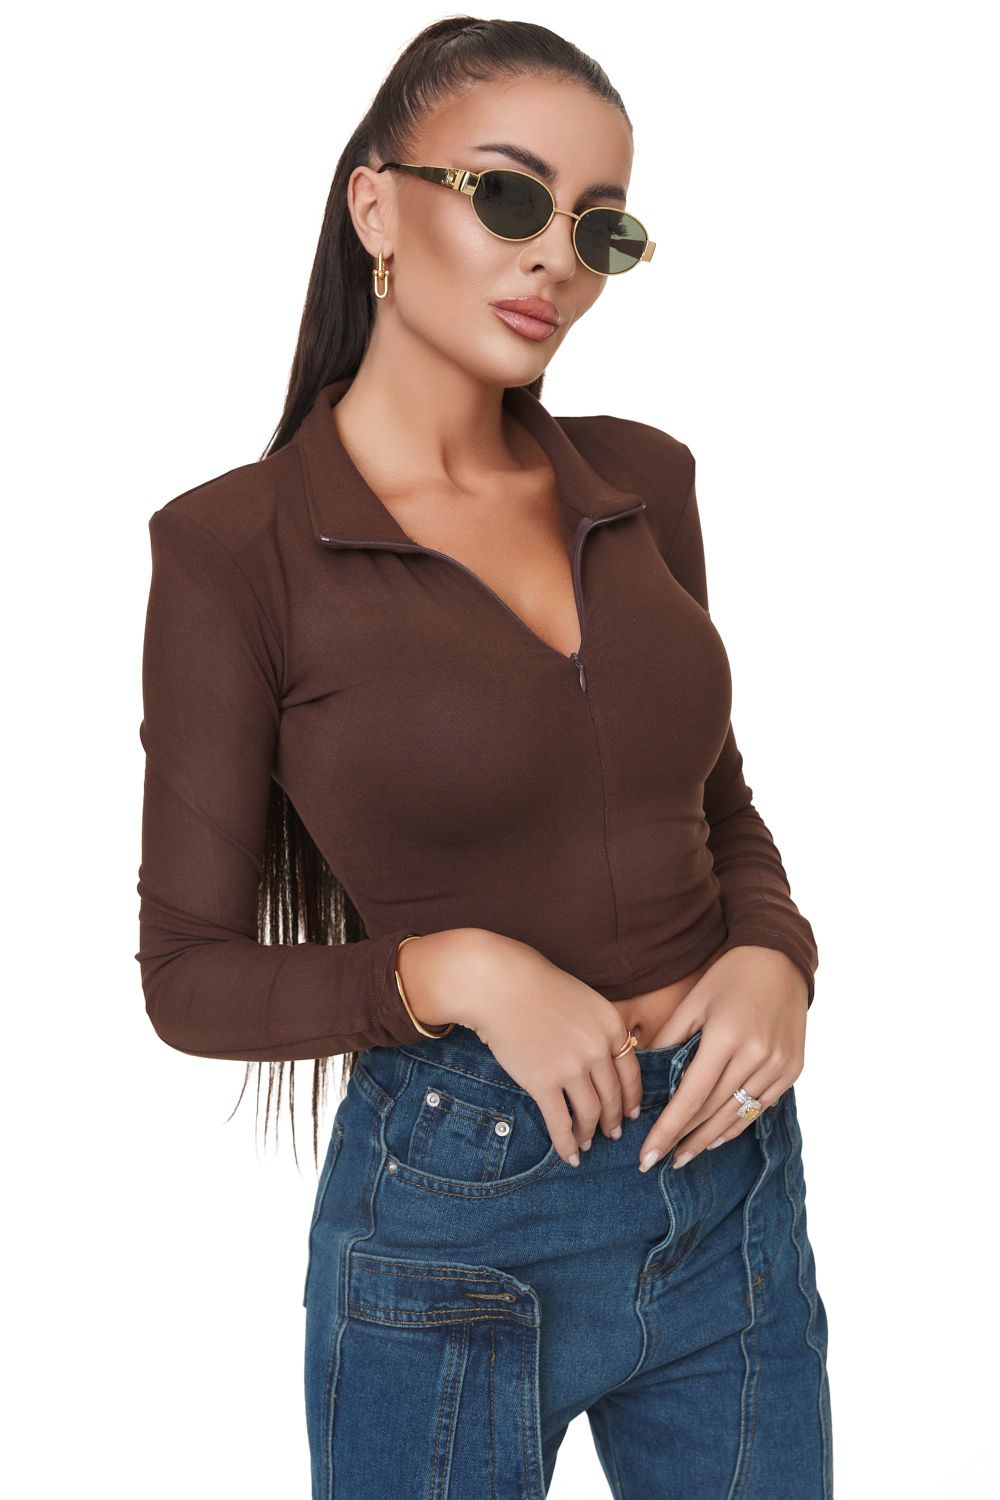 Resiay Bogas brown casual ladies blouse